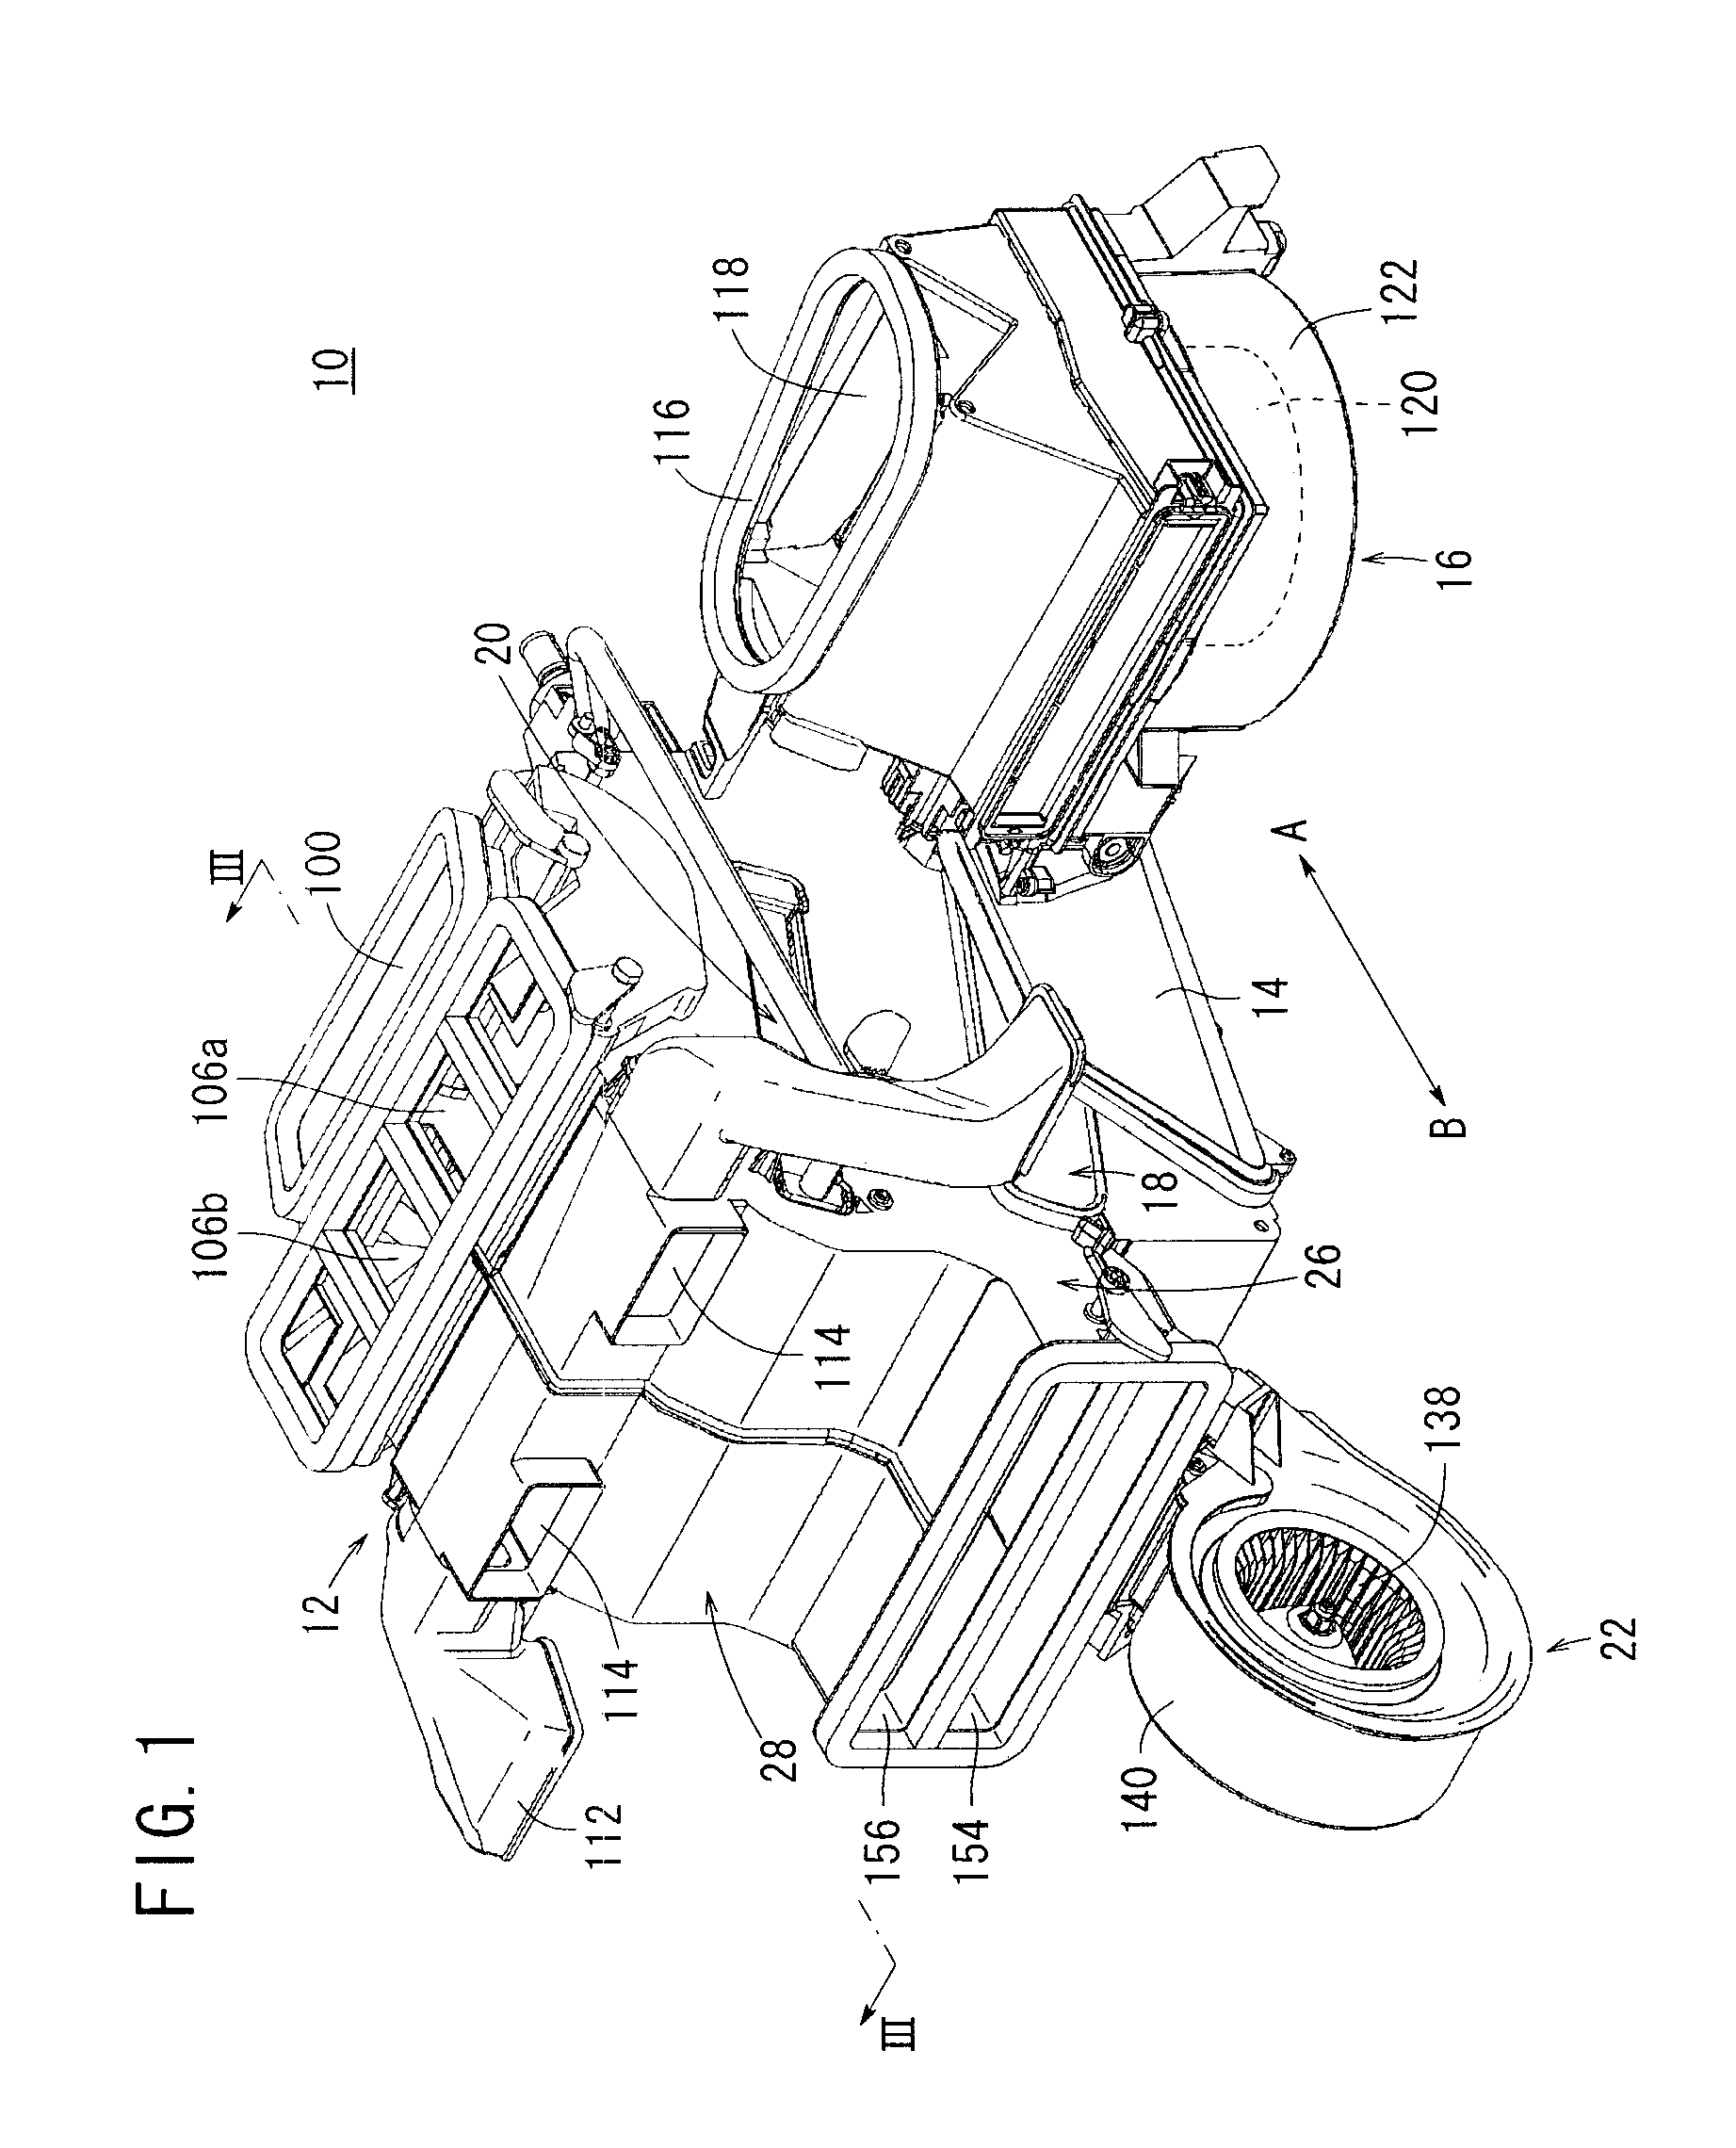 Heat exchanger for vehicular air conditioning apparatus